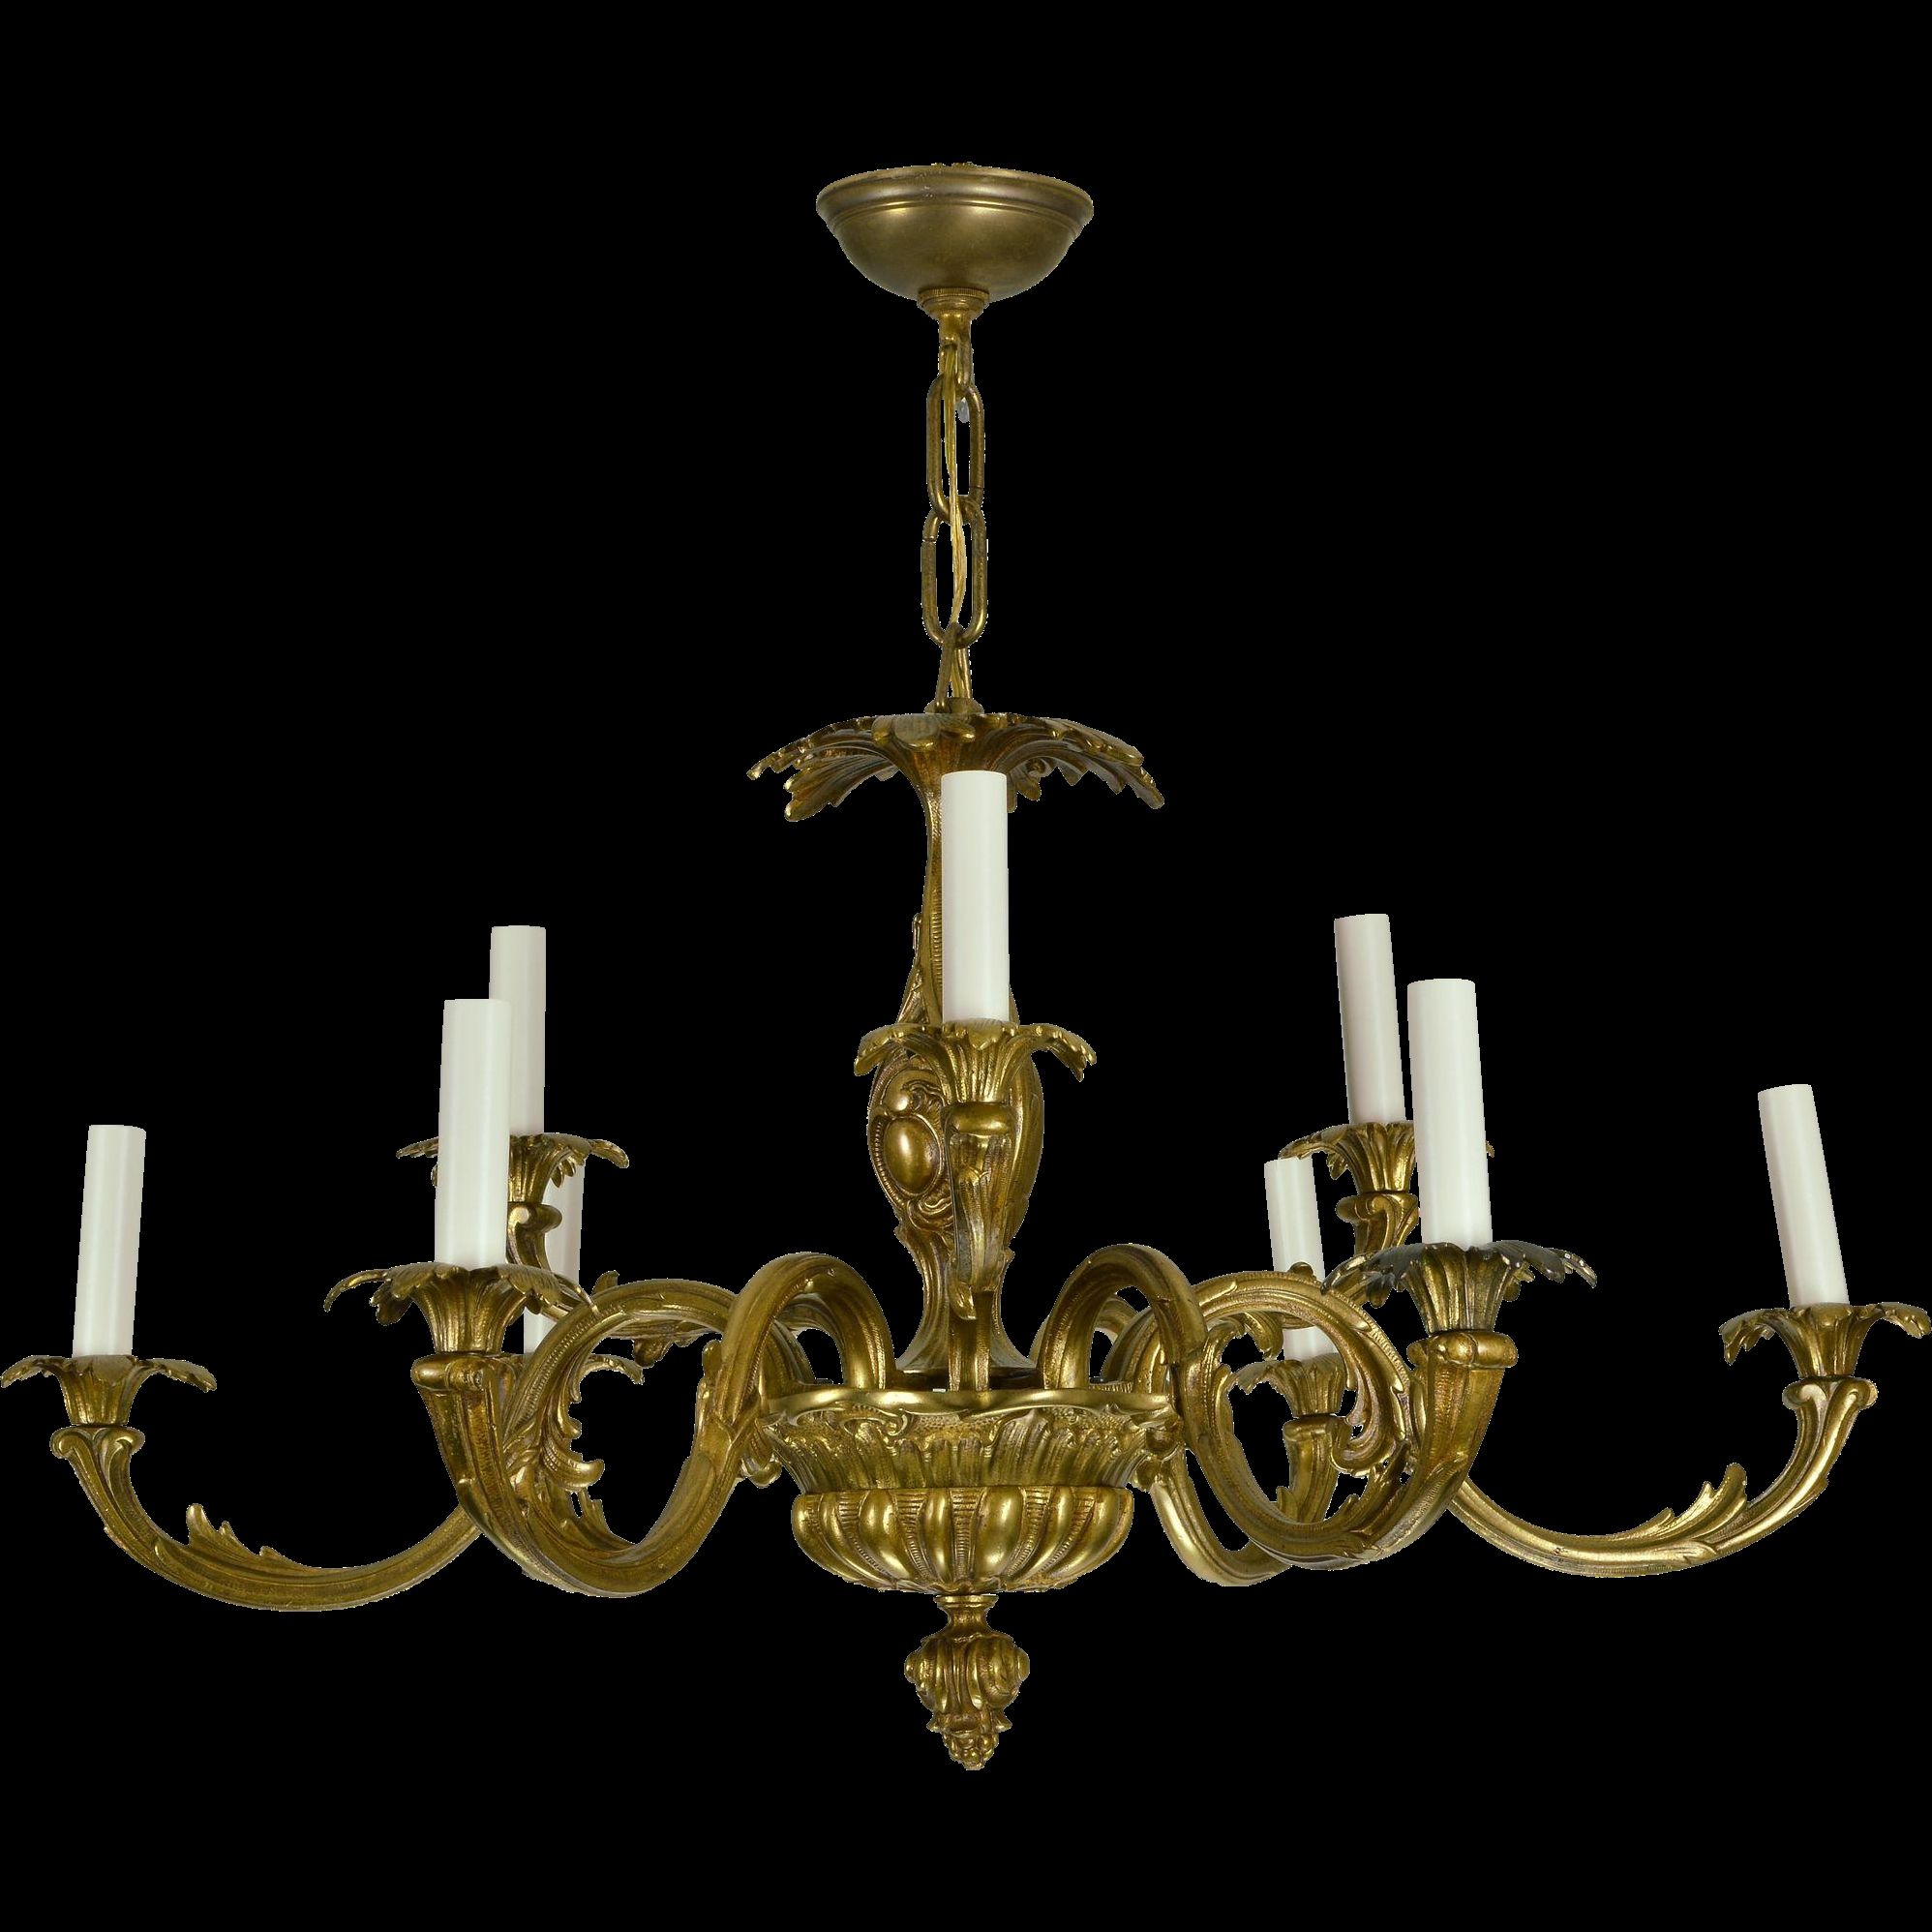 Vintage Brass French Baroque Chandelier From Tolw On Ru Lane Throughout Vintage Chandelier (View 7 of 15)